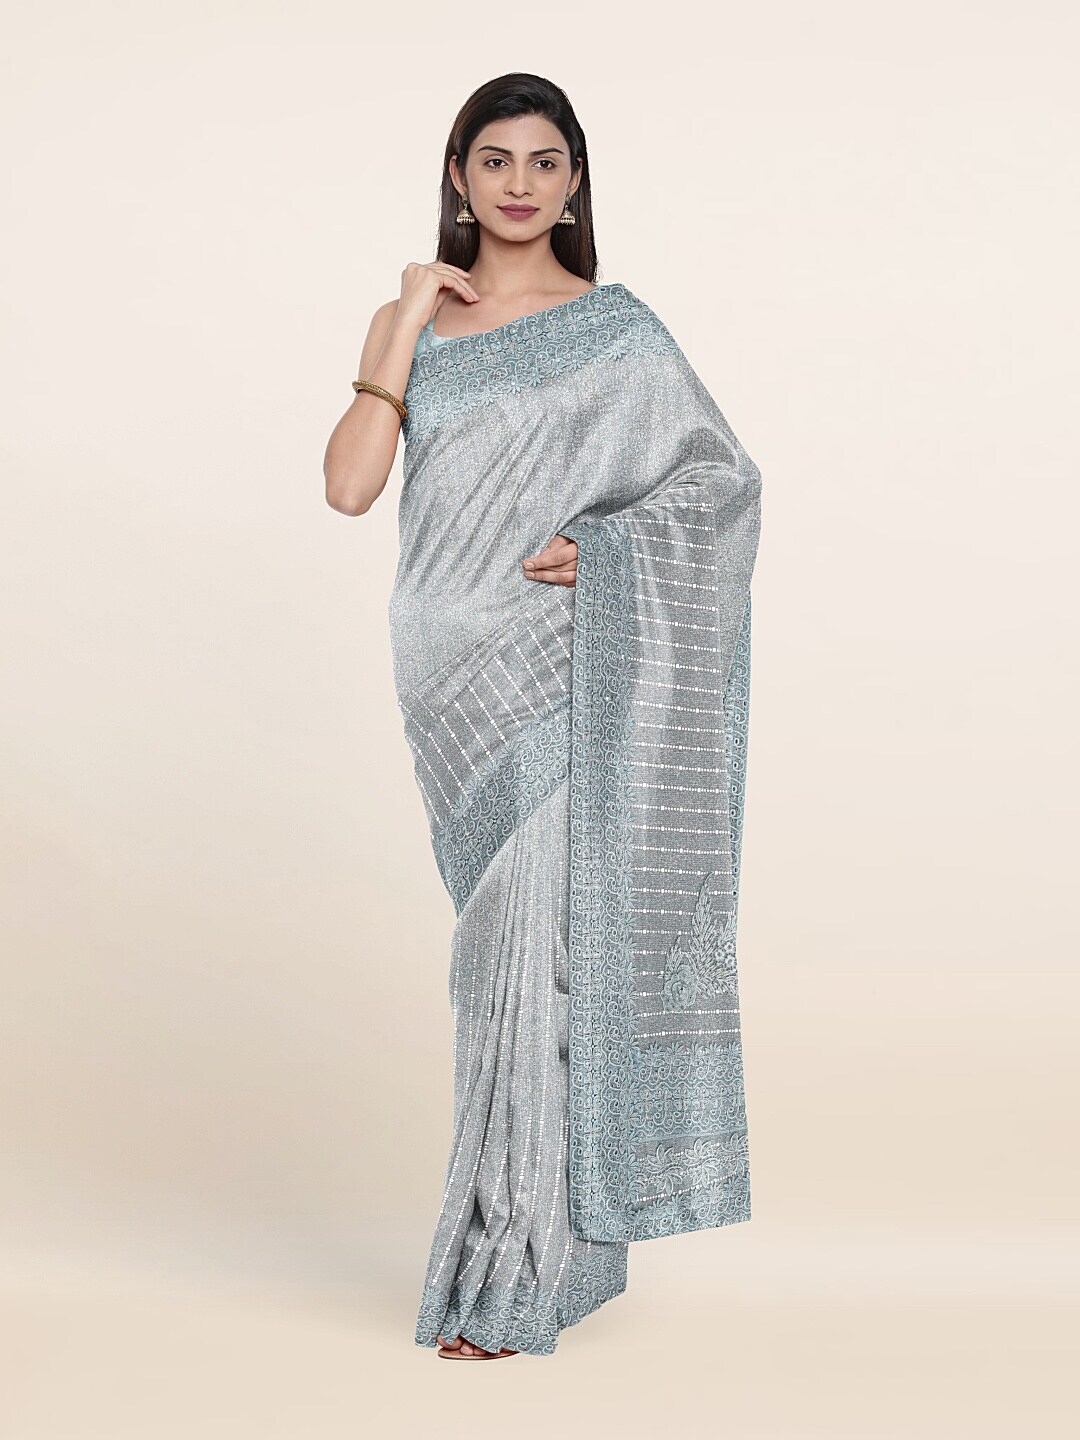 Pothys Blue & White Striped Embroidered Georgette Saree Price in India